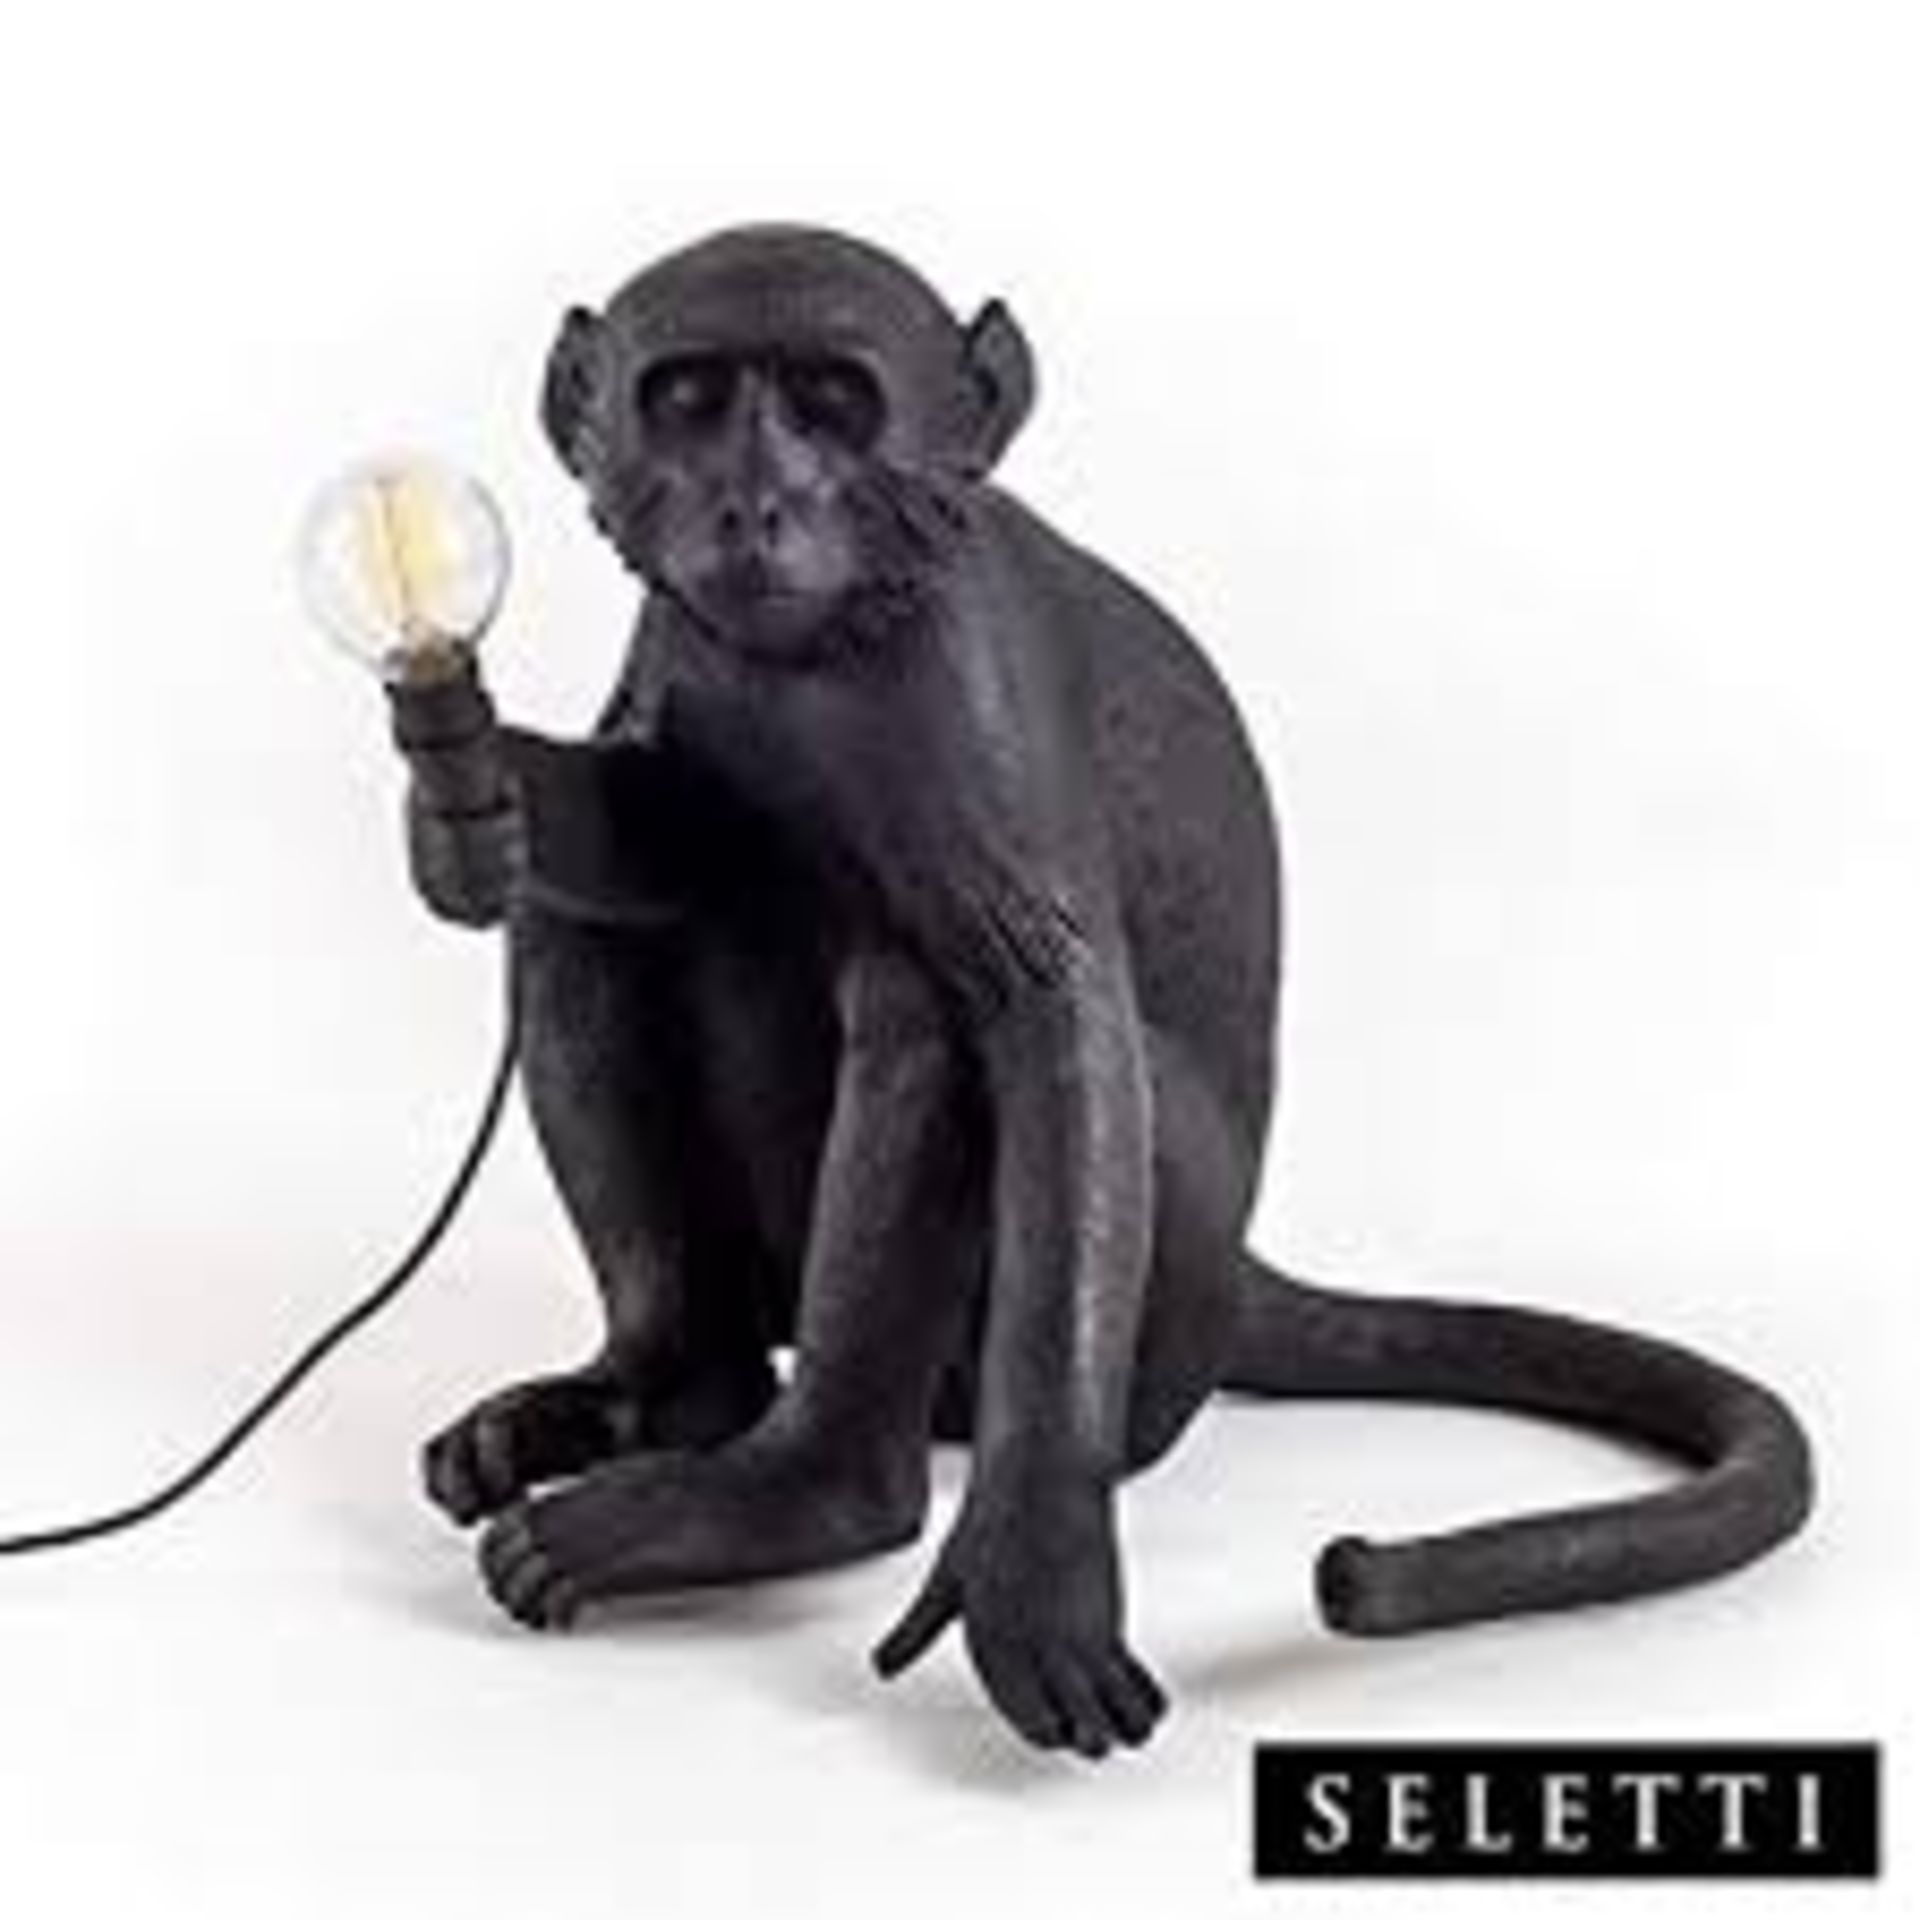 Boxed John Lewis and Partners Celeti Sit Monkey Lamp RRP £195 (2588753) (Viewing/Appraisals Highly